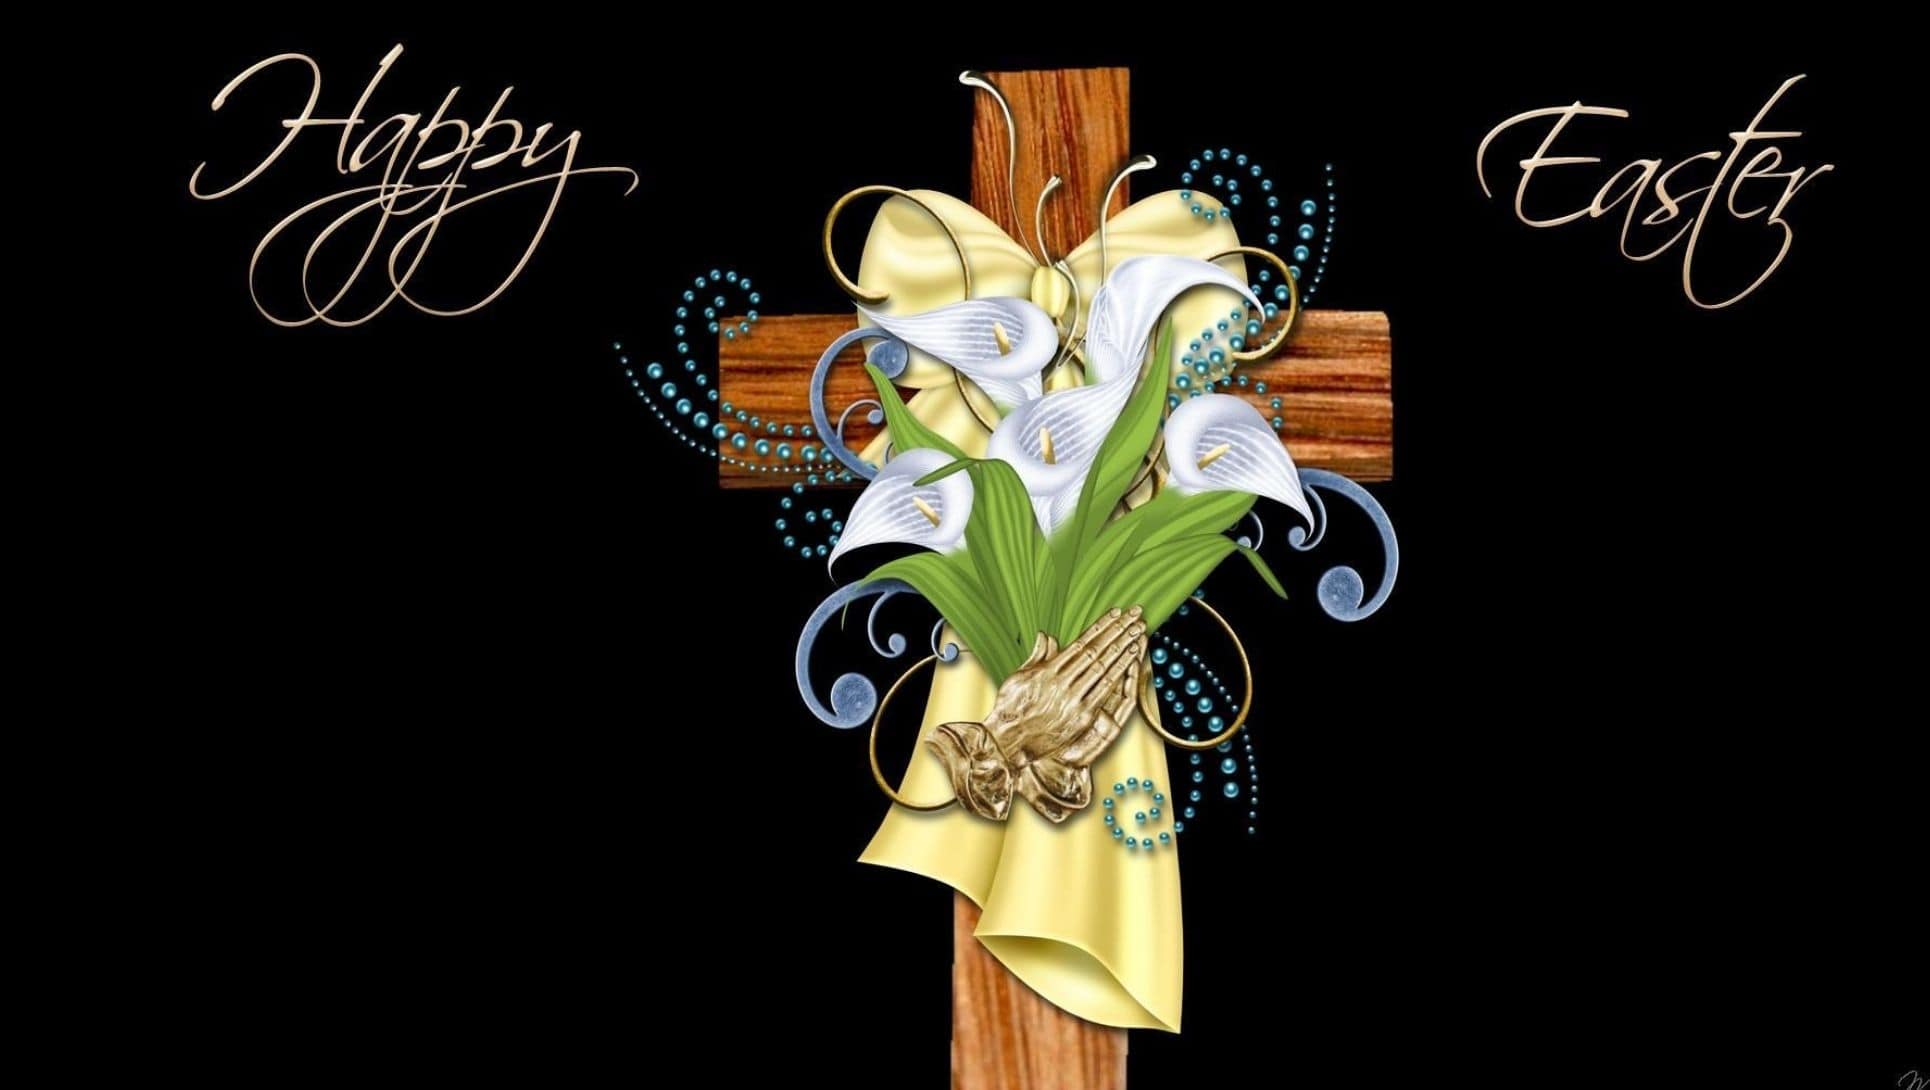 Religious Images for Easter